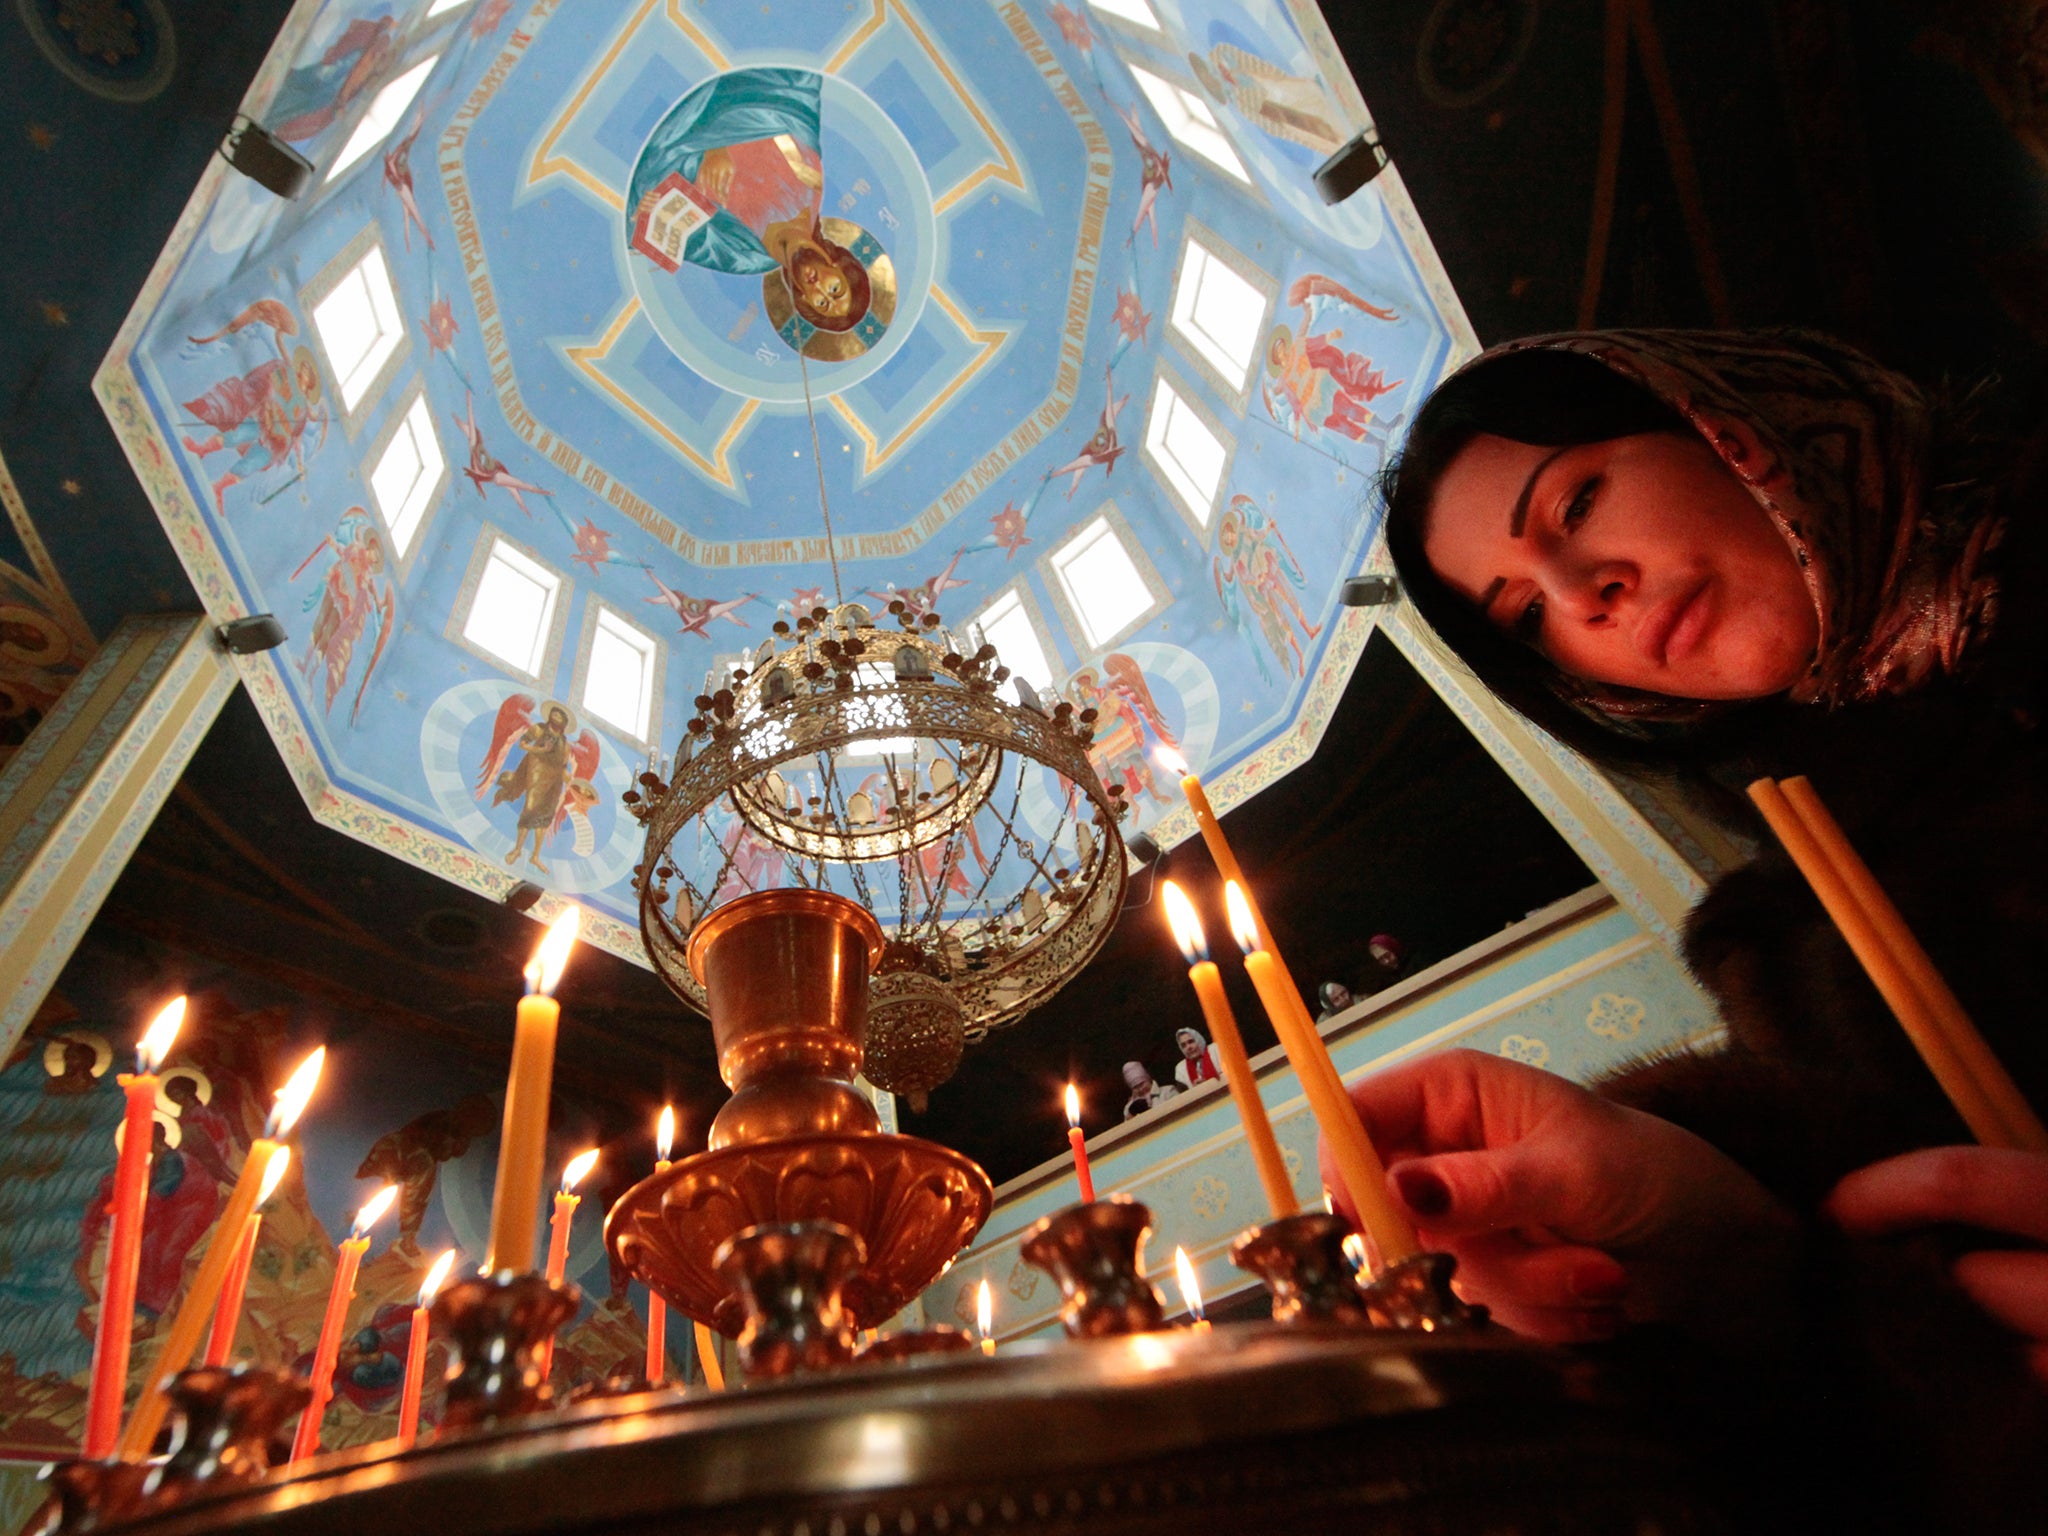 Russia has the largest Orthodox Christian community in the world